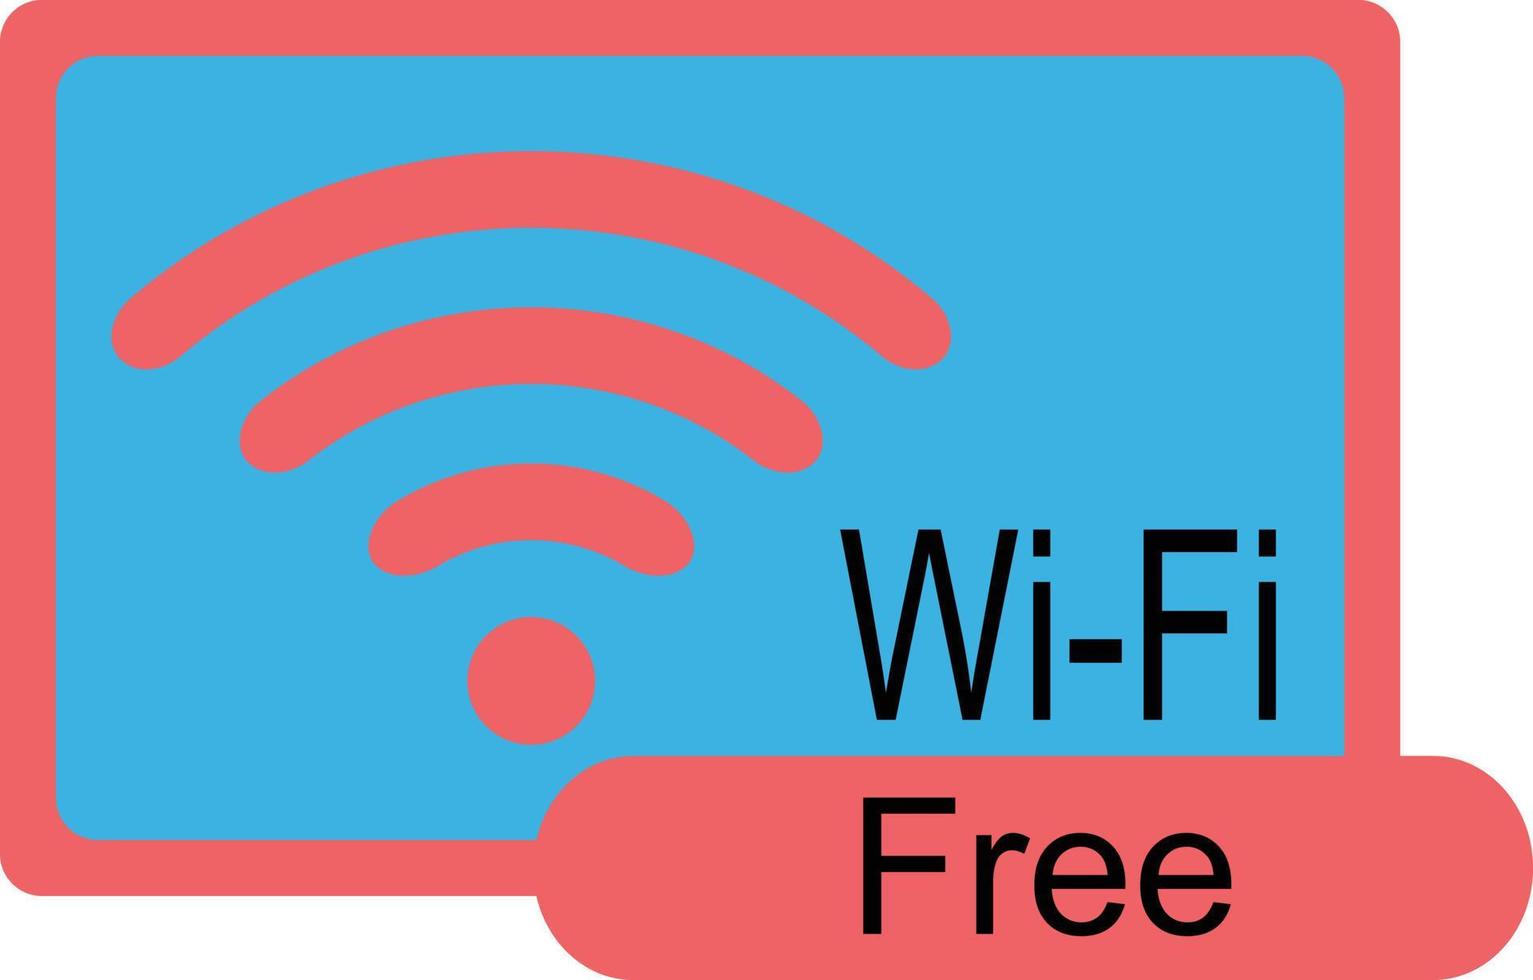 Flat style free Wi-Fi icon. network symbol for internet connection. vector